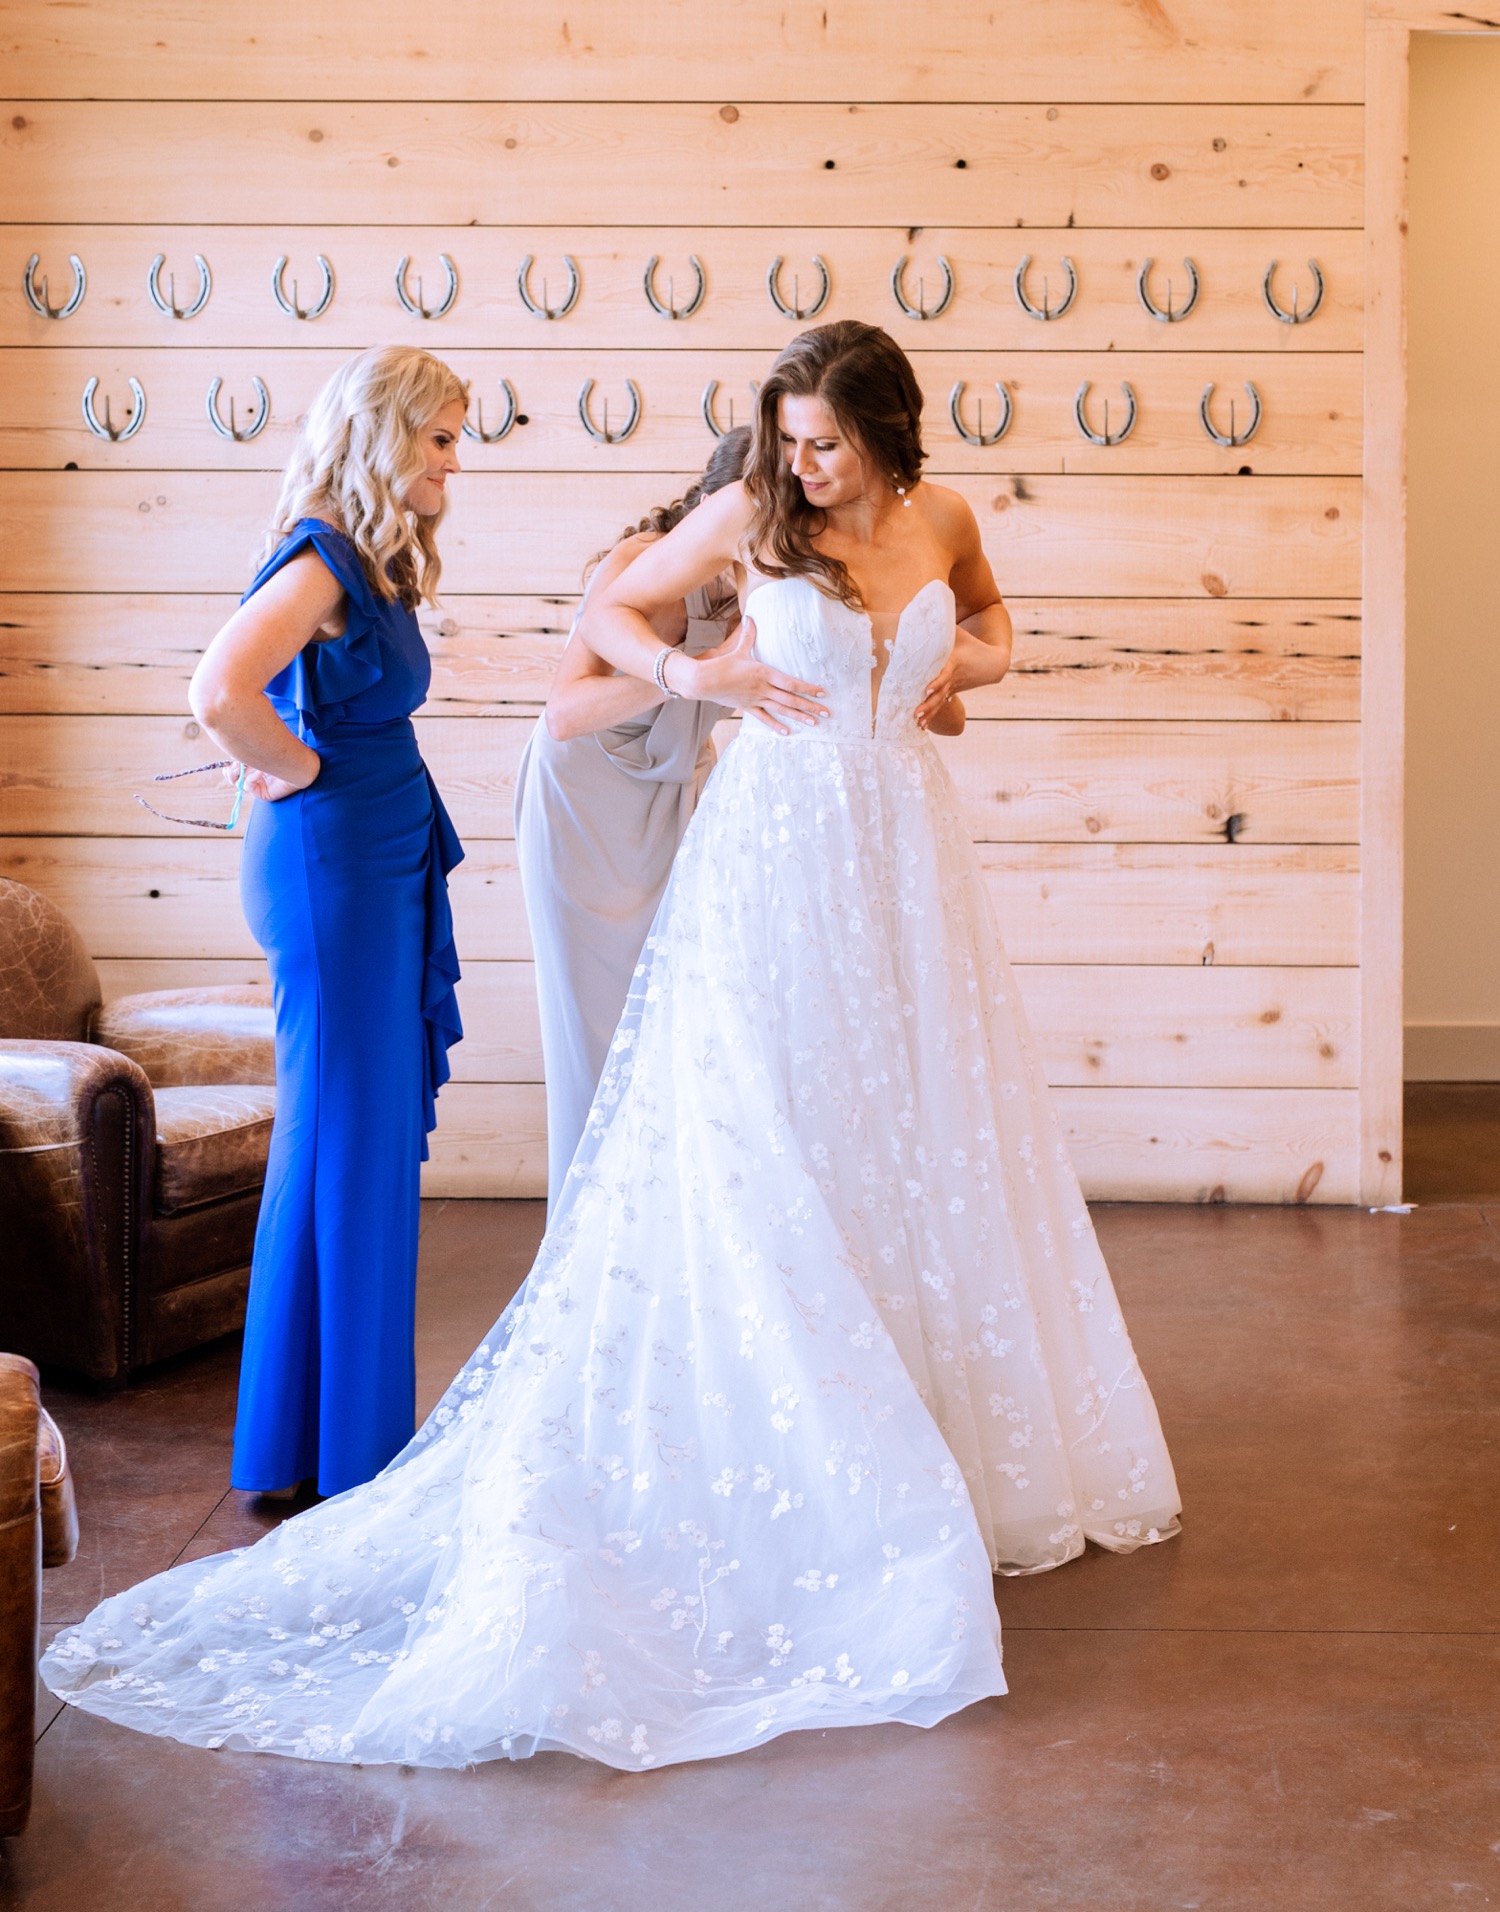 bride with her mom and mother in law zipping up her wedding dress to head to the ceremony